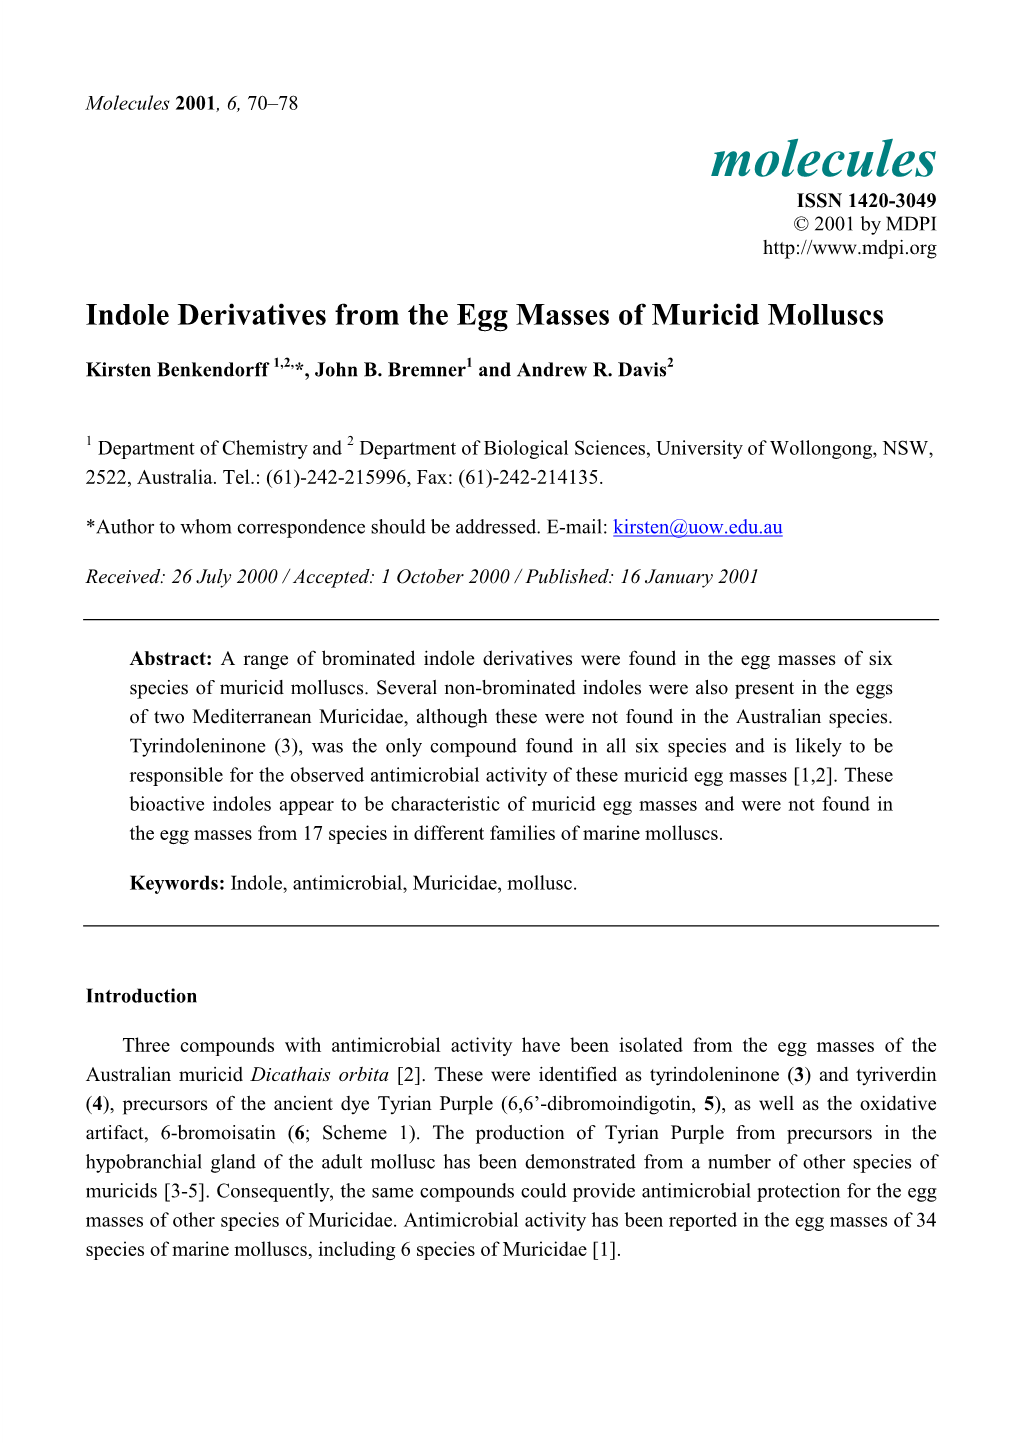 Indole Derivatives from the Egg Masses of Muricid Molluscs